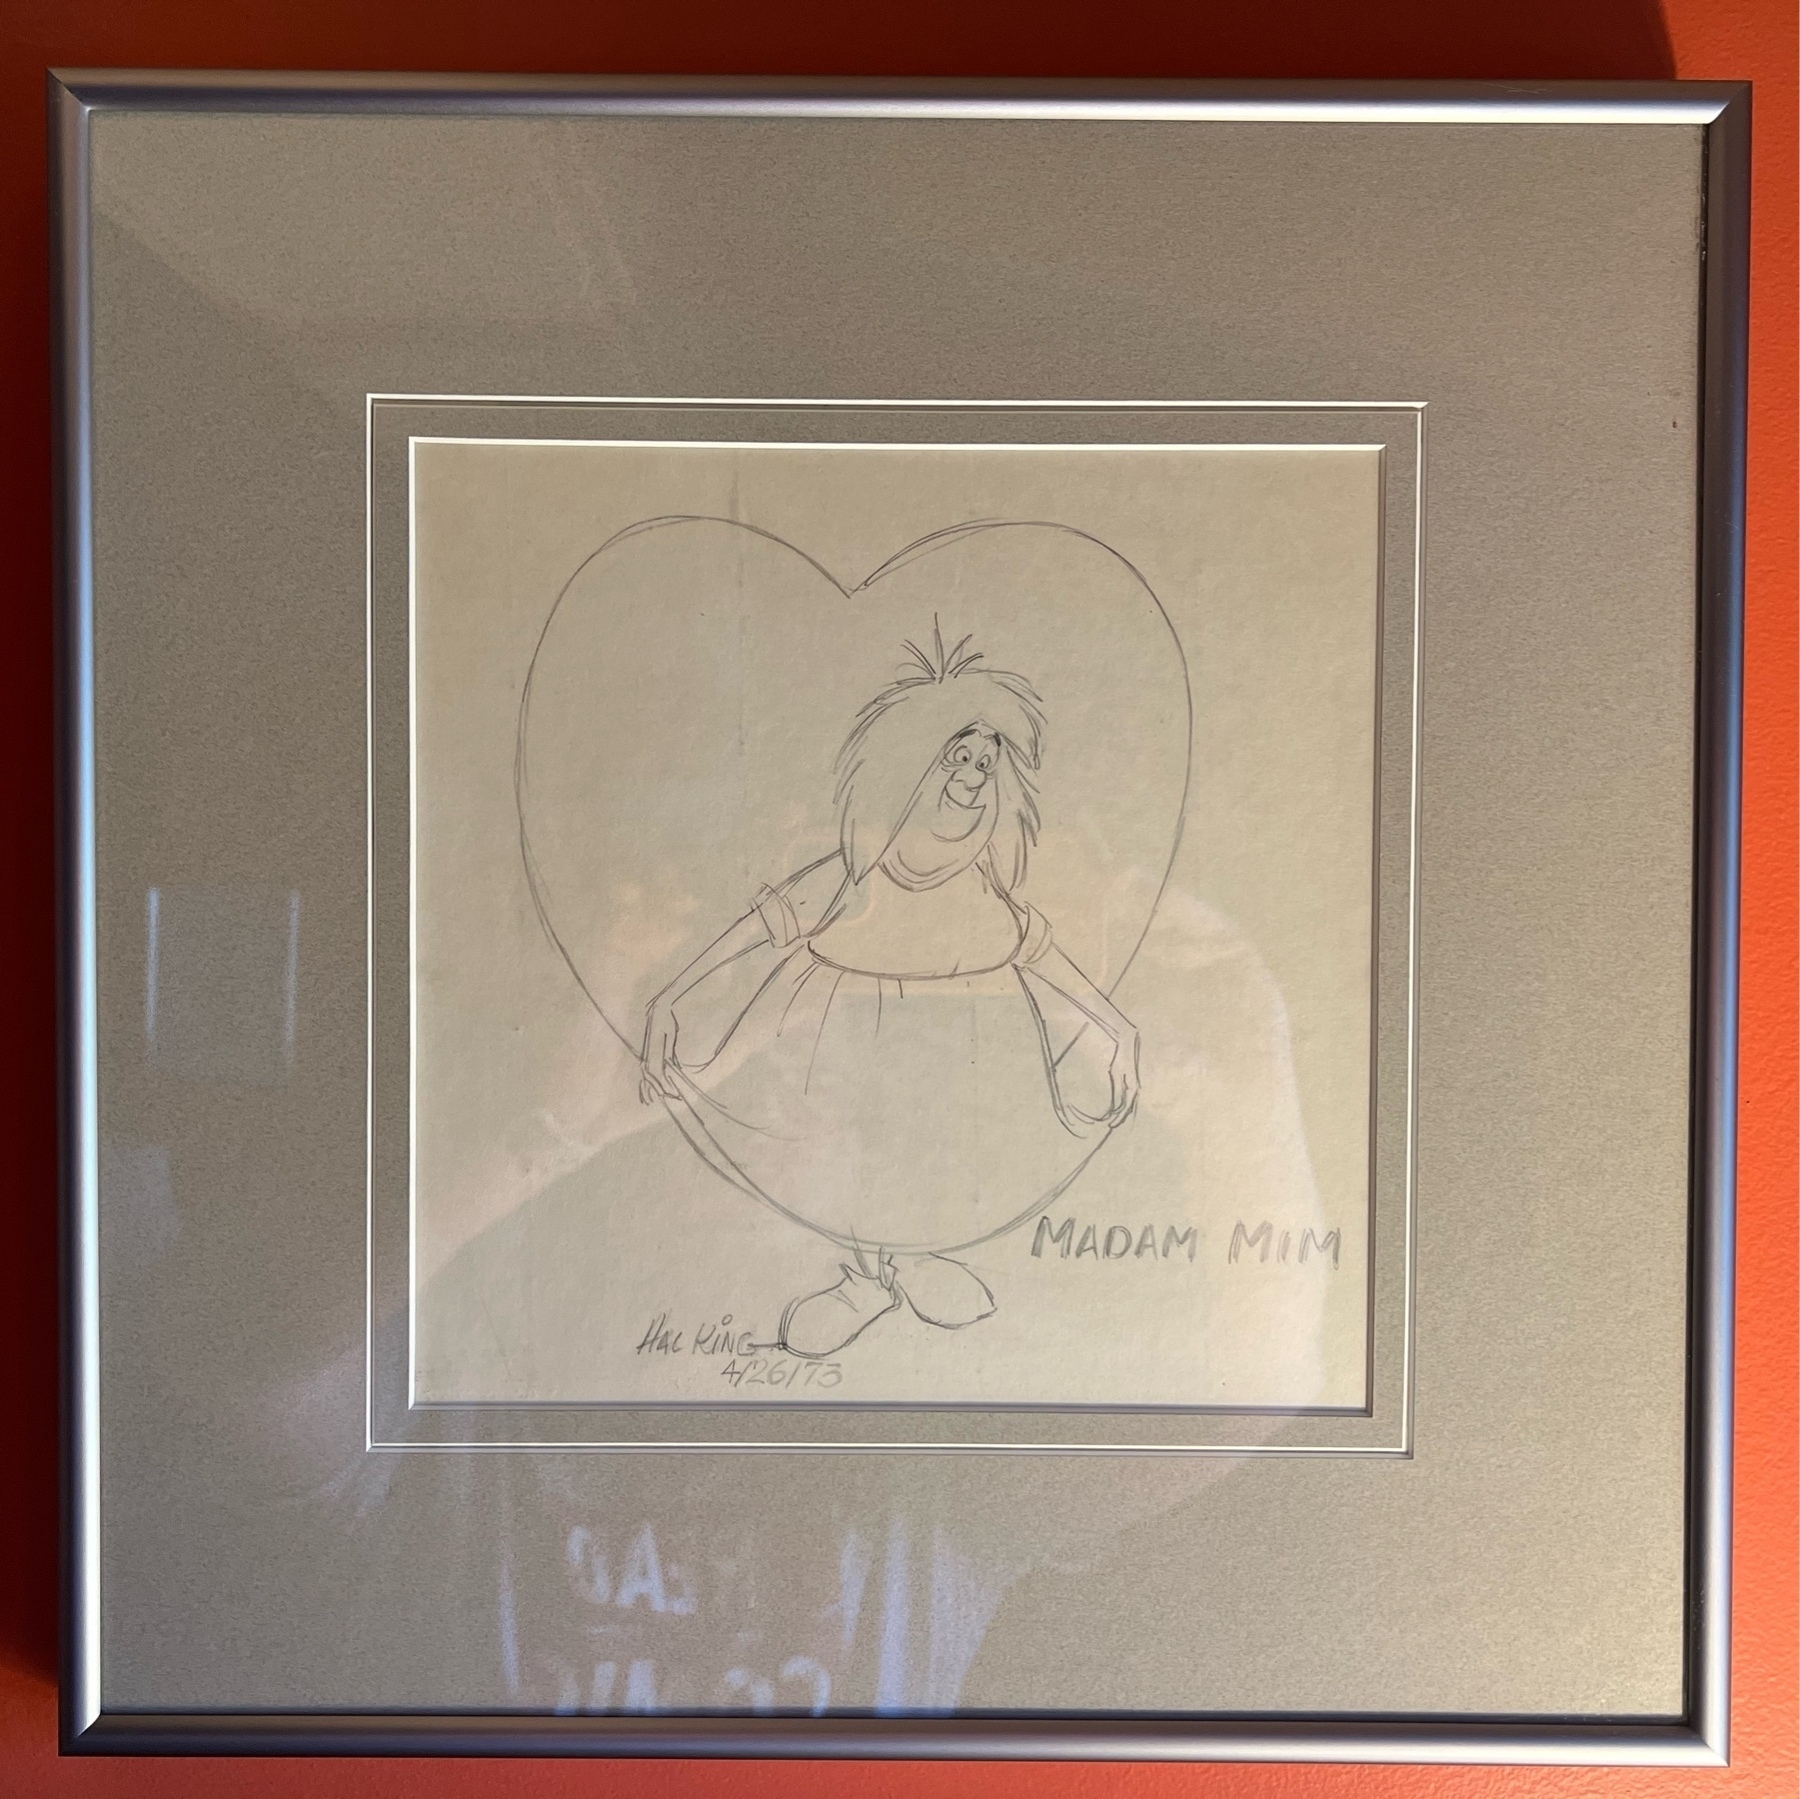 Sketch of Madam Mim beginning a curtsey, with a large heart background. Captioned "Madam Mim" in capital letters, and Hal King's signature. 